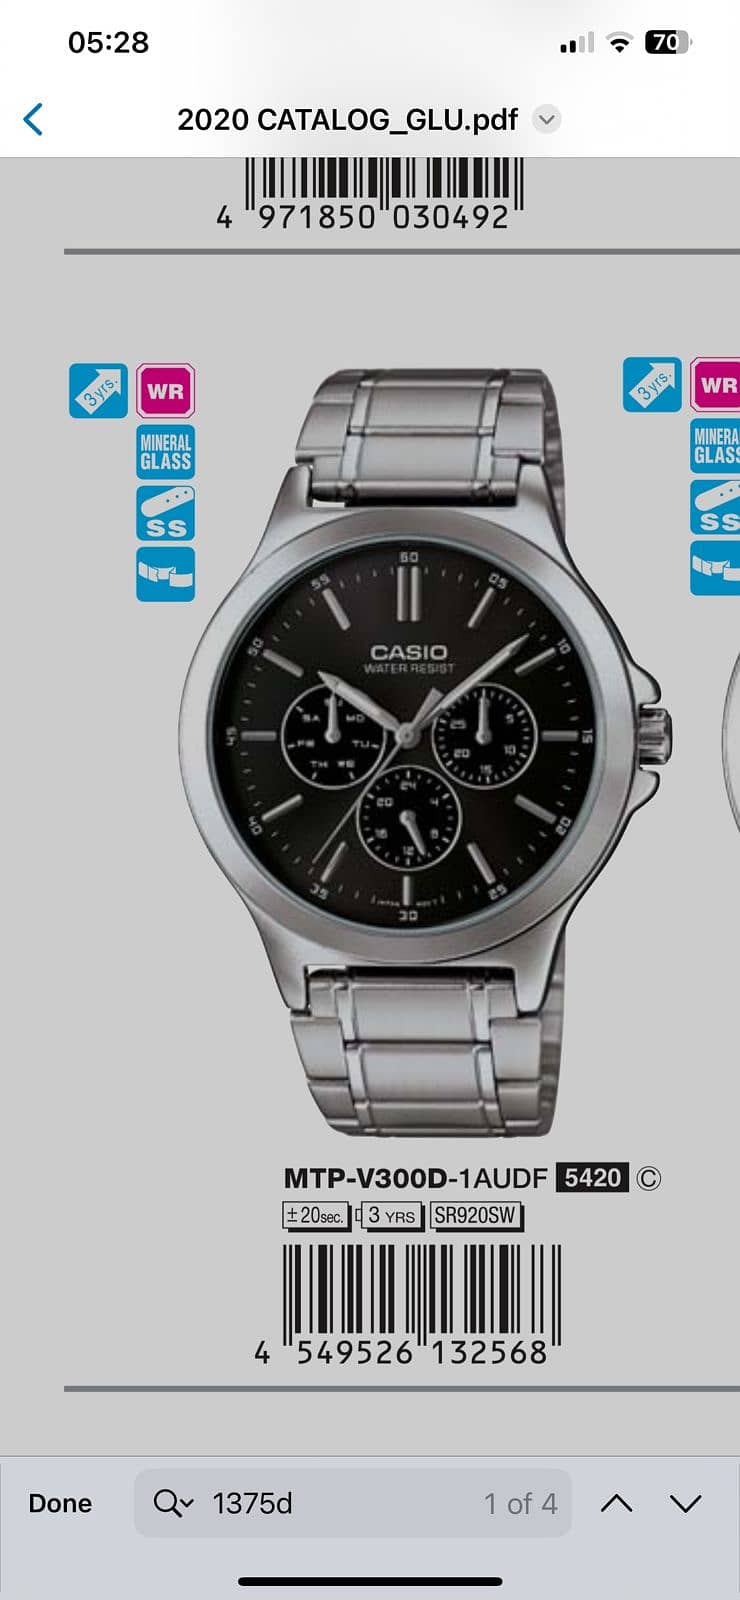 Casio watches on discounted prices 3